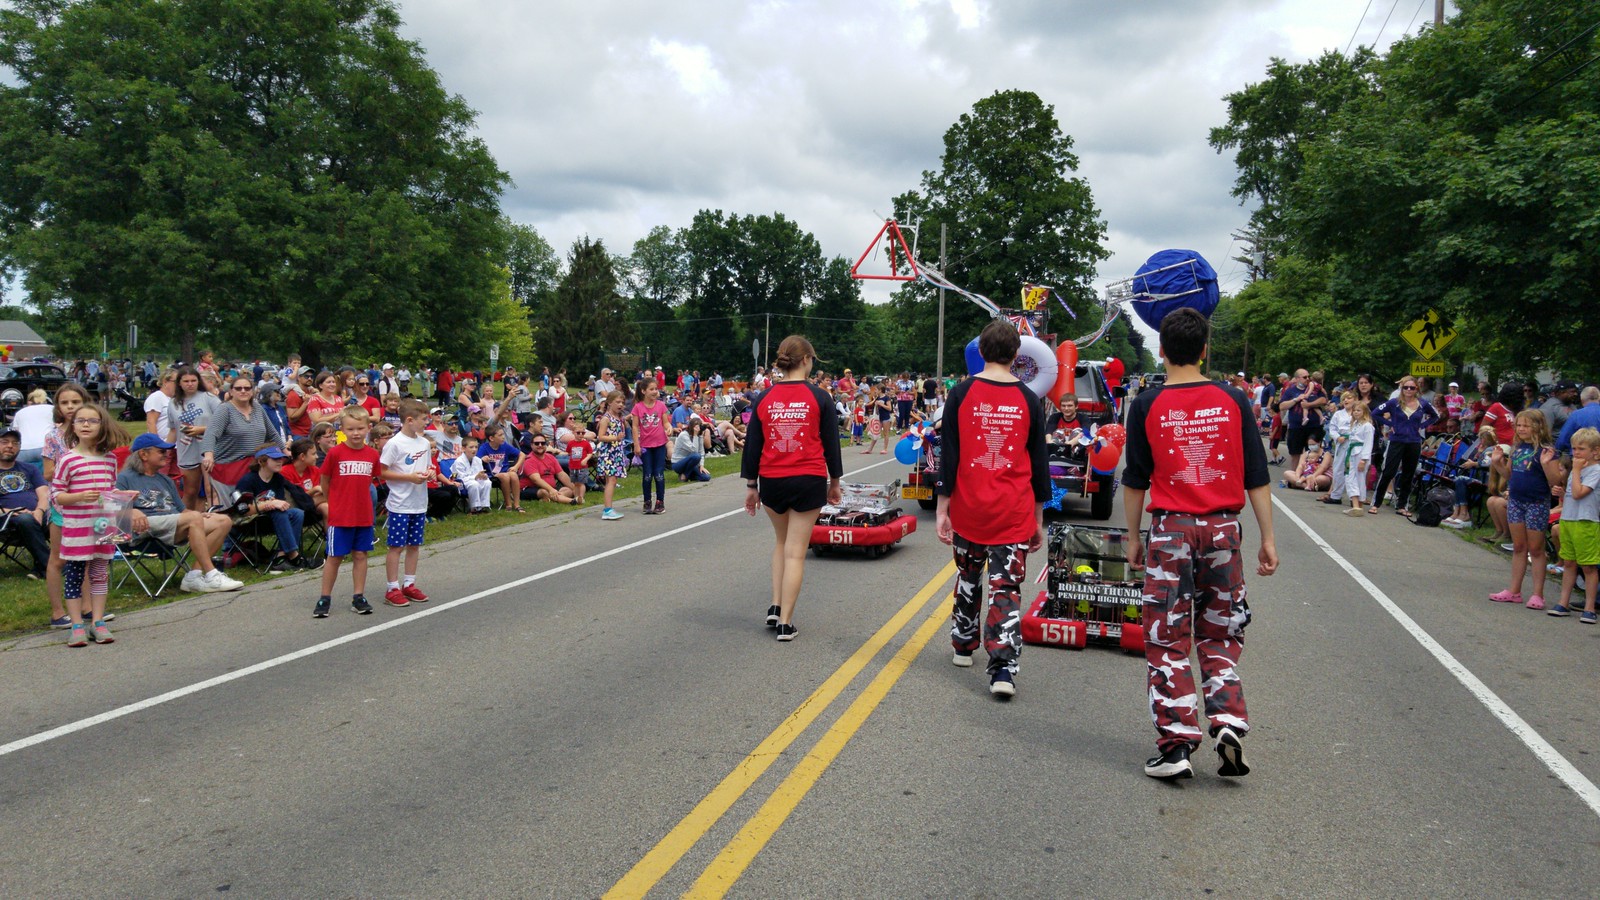 Penfield Independence Day Parade FRC 1511 Rolling Thunder